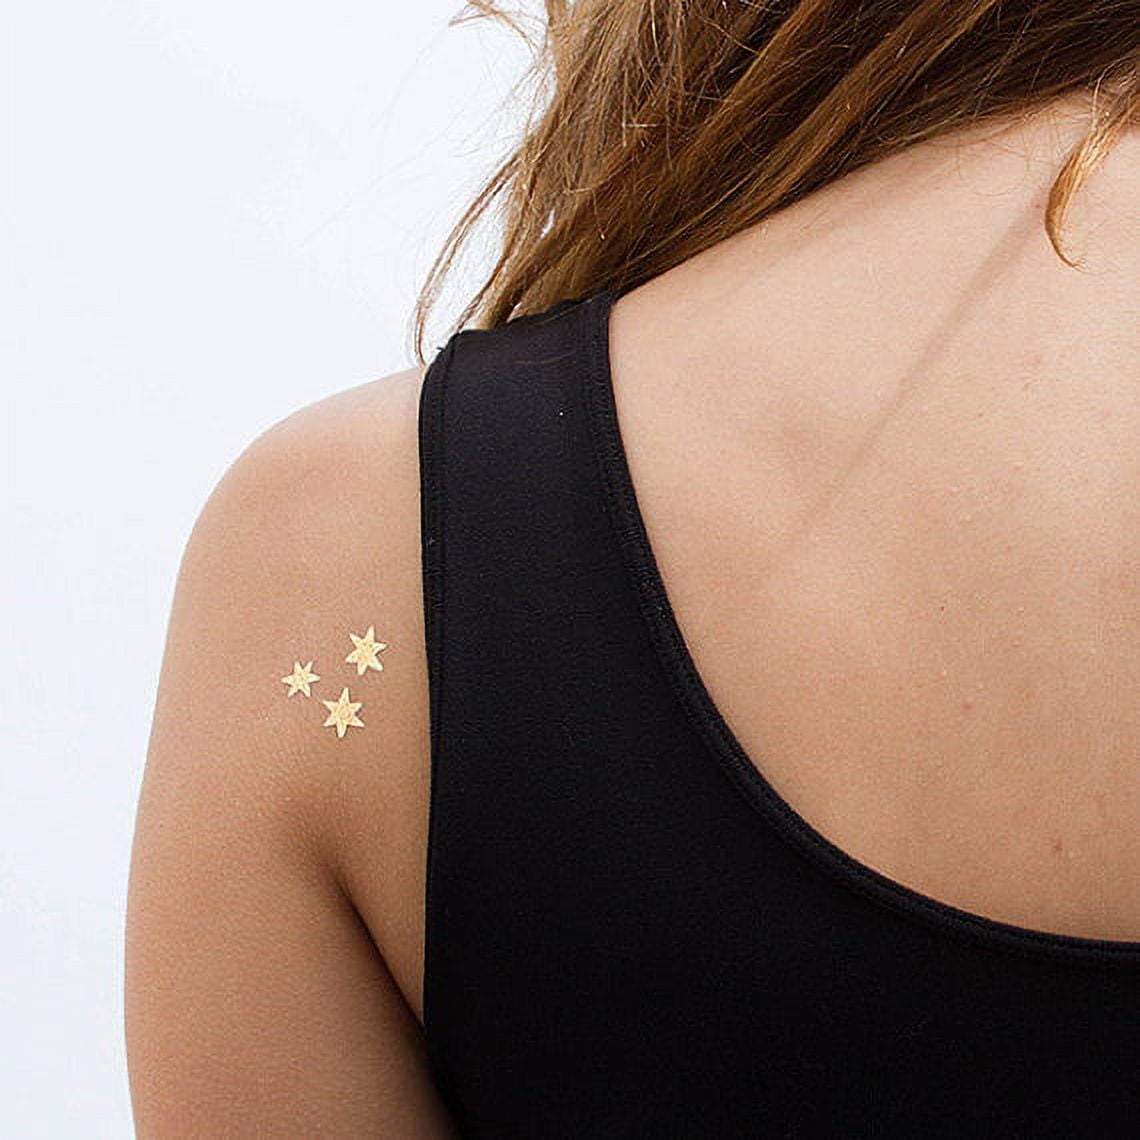 Amazon.com : Allydrew Large Metallic Gold Silver and Black Body Art  Temporary Tattoos, Stars, Hearts, Arrows, Bands : Beauty & Personal Care